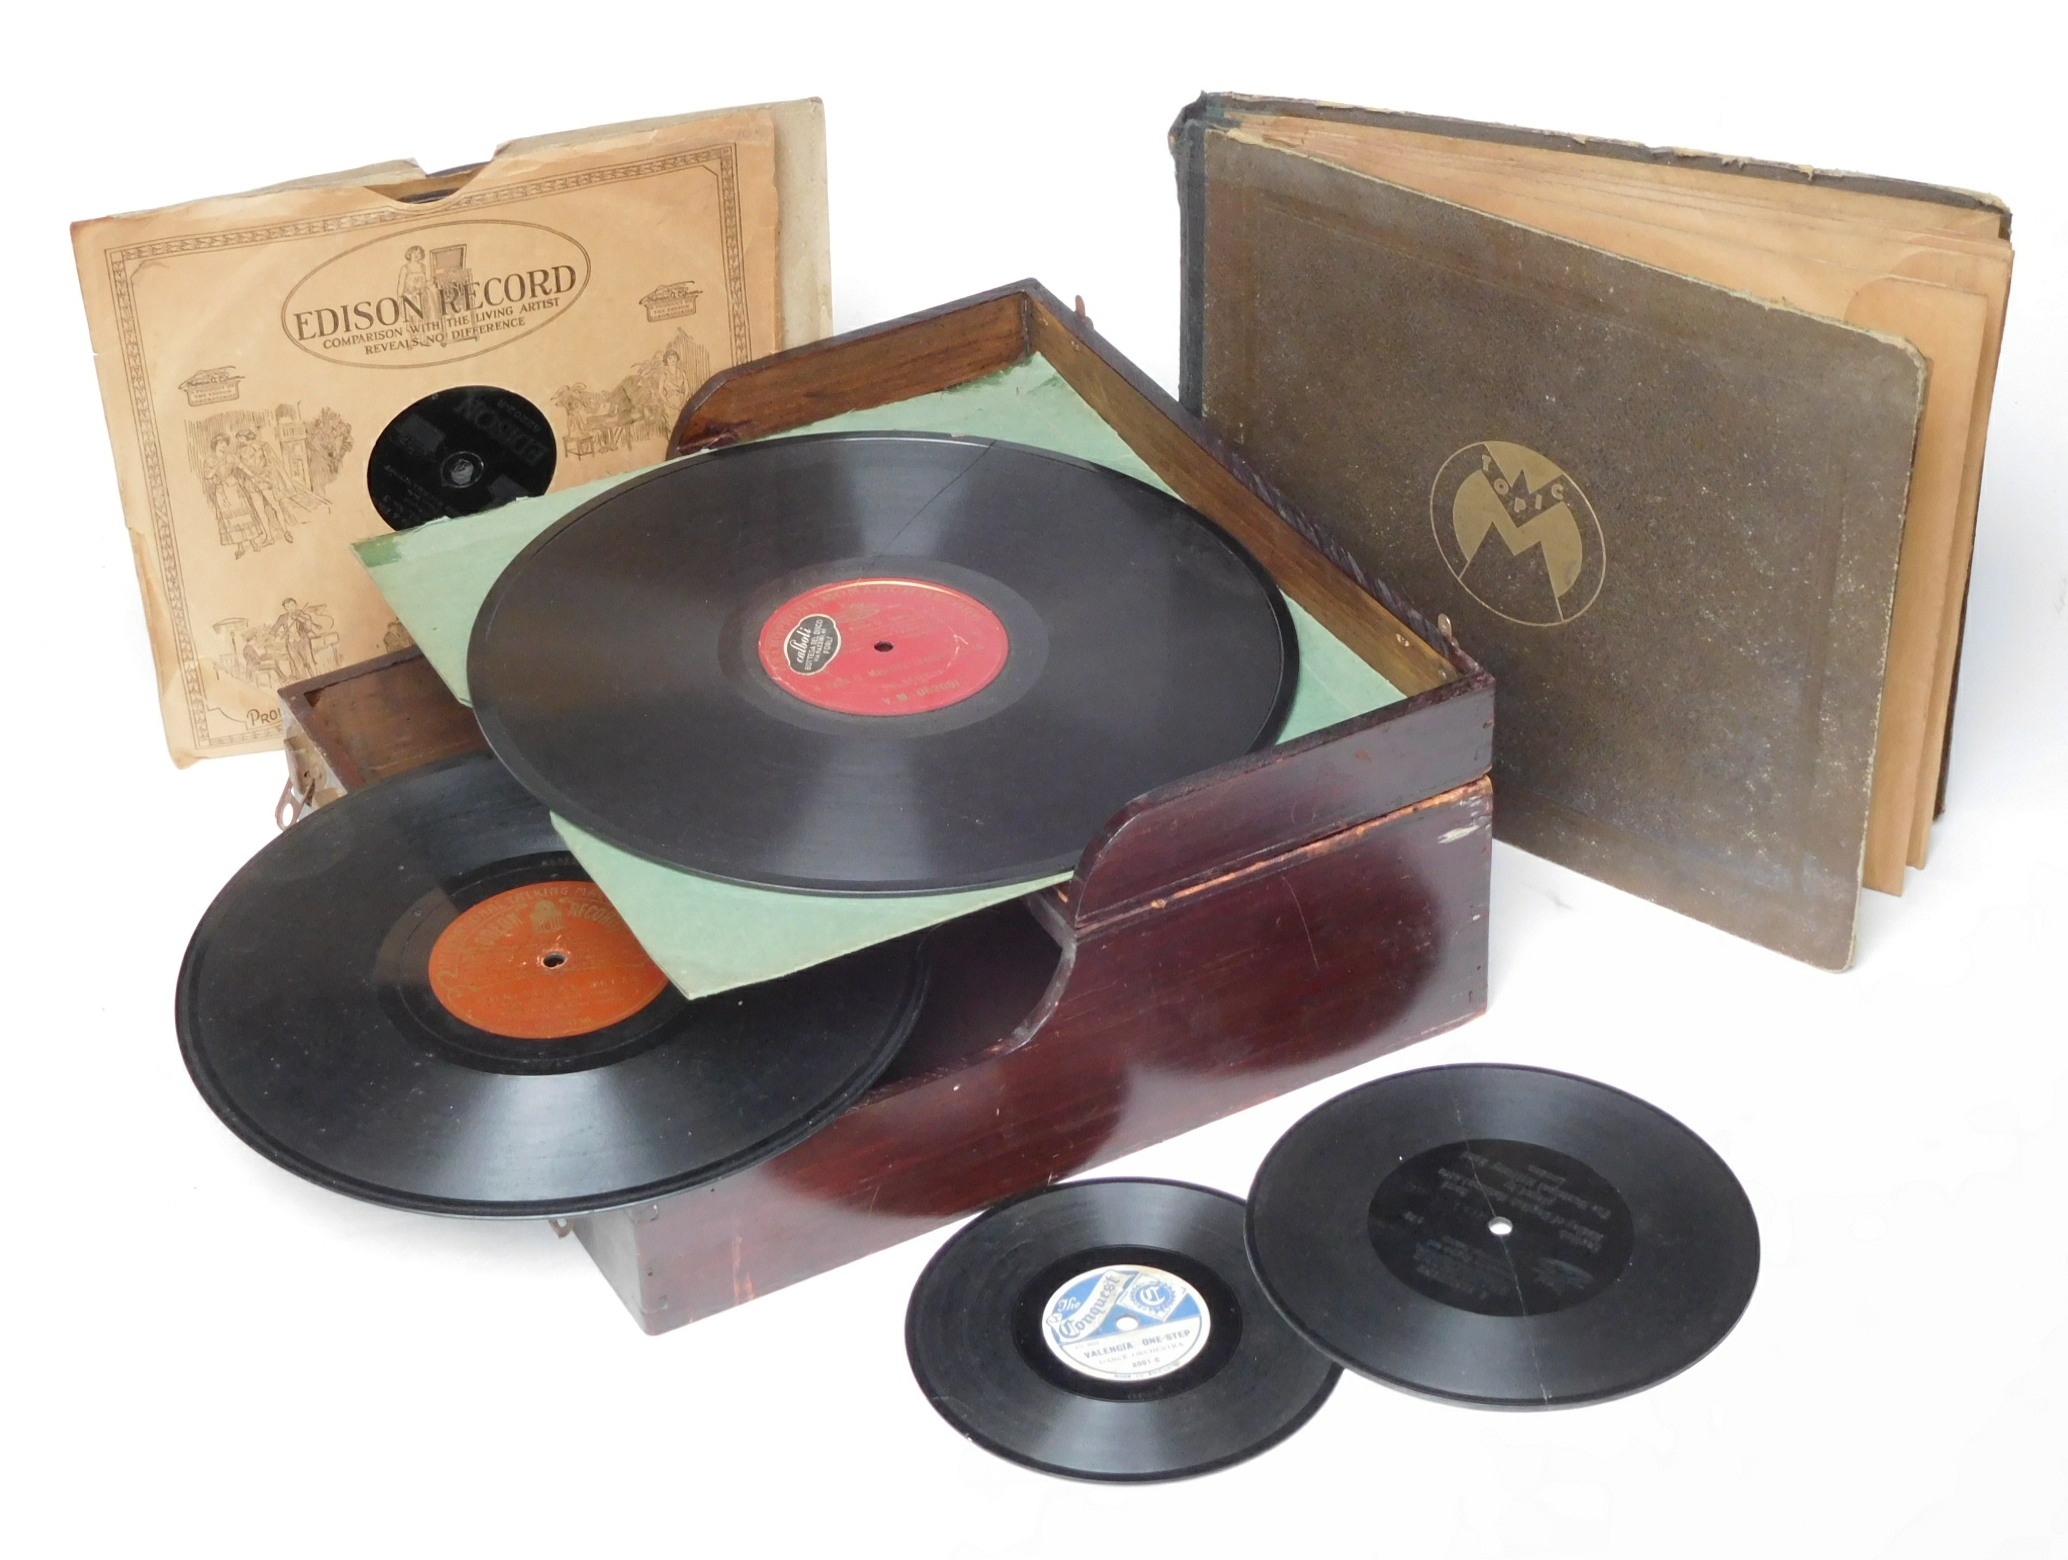 Miscellaneous records: 7-inch Berliner 179, Military Band (180 degree crack repaired); 6-inch